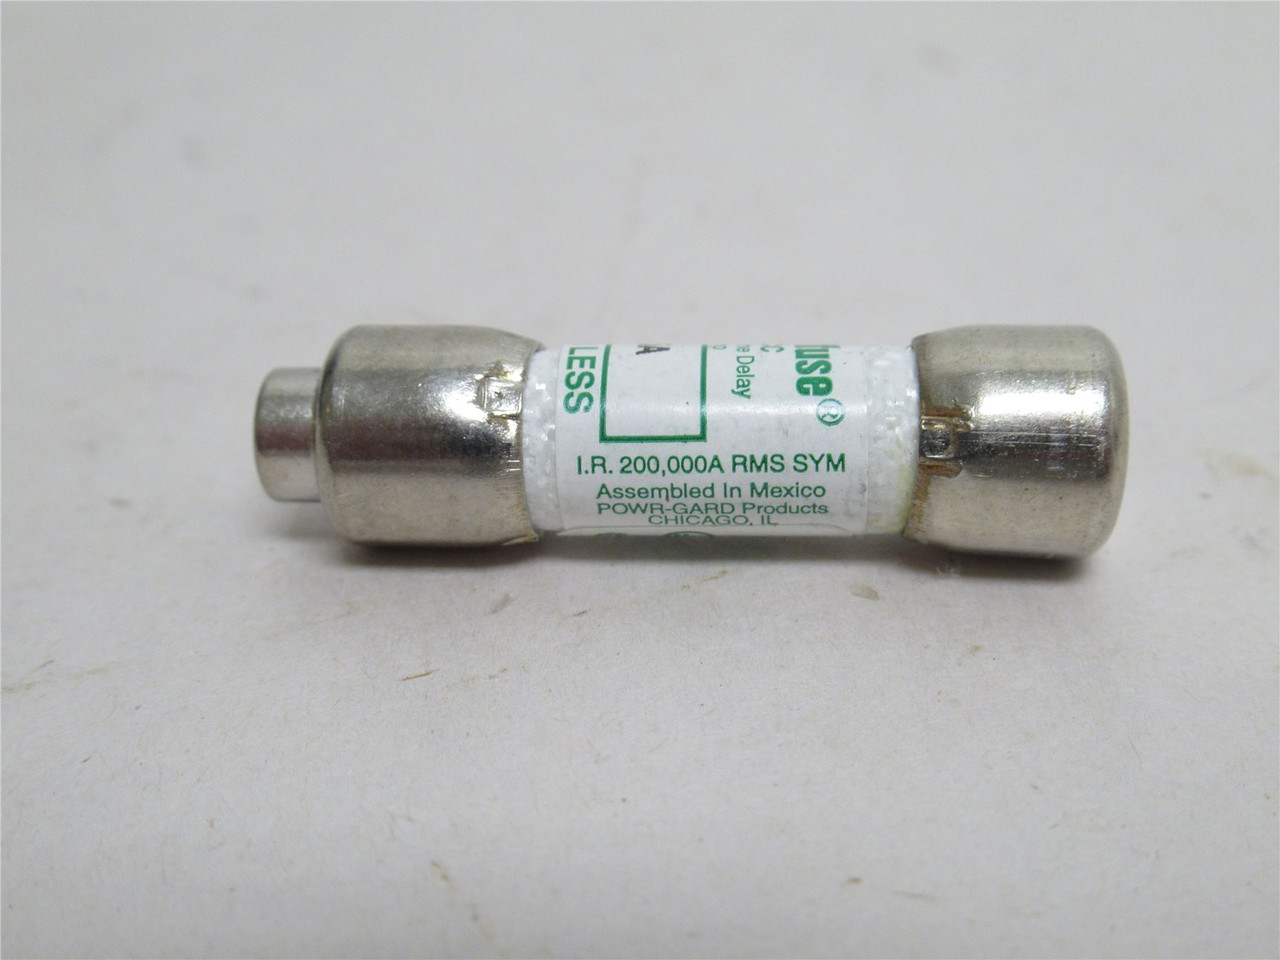 Littlefuse CCMR-5A; Dual Element; Time Delay Fuse; 5A; 600VAC